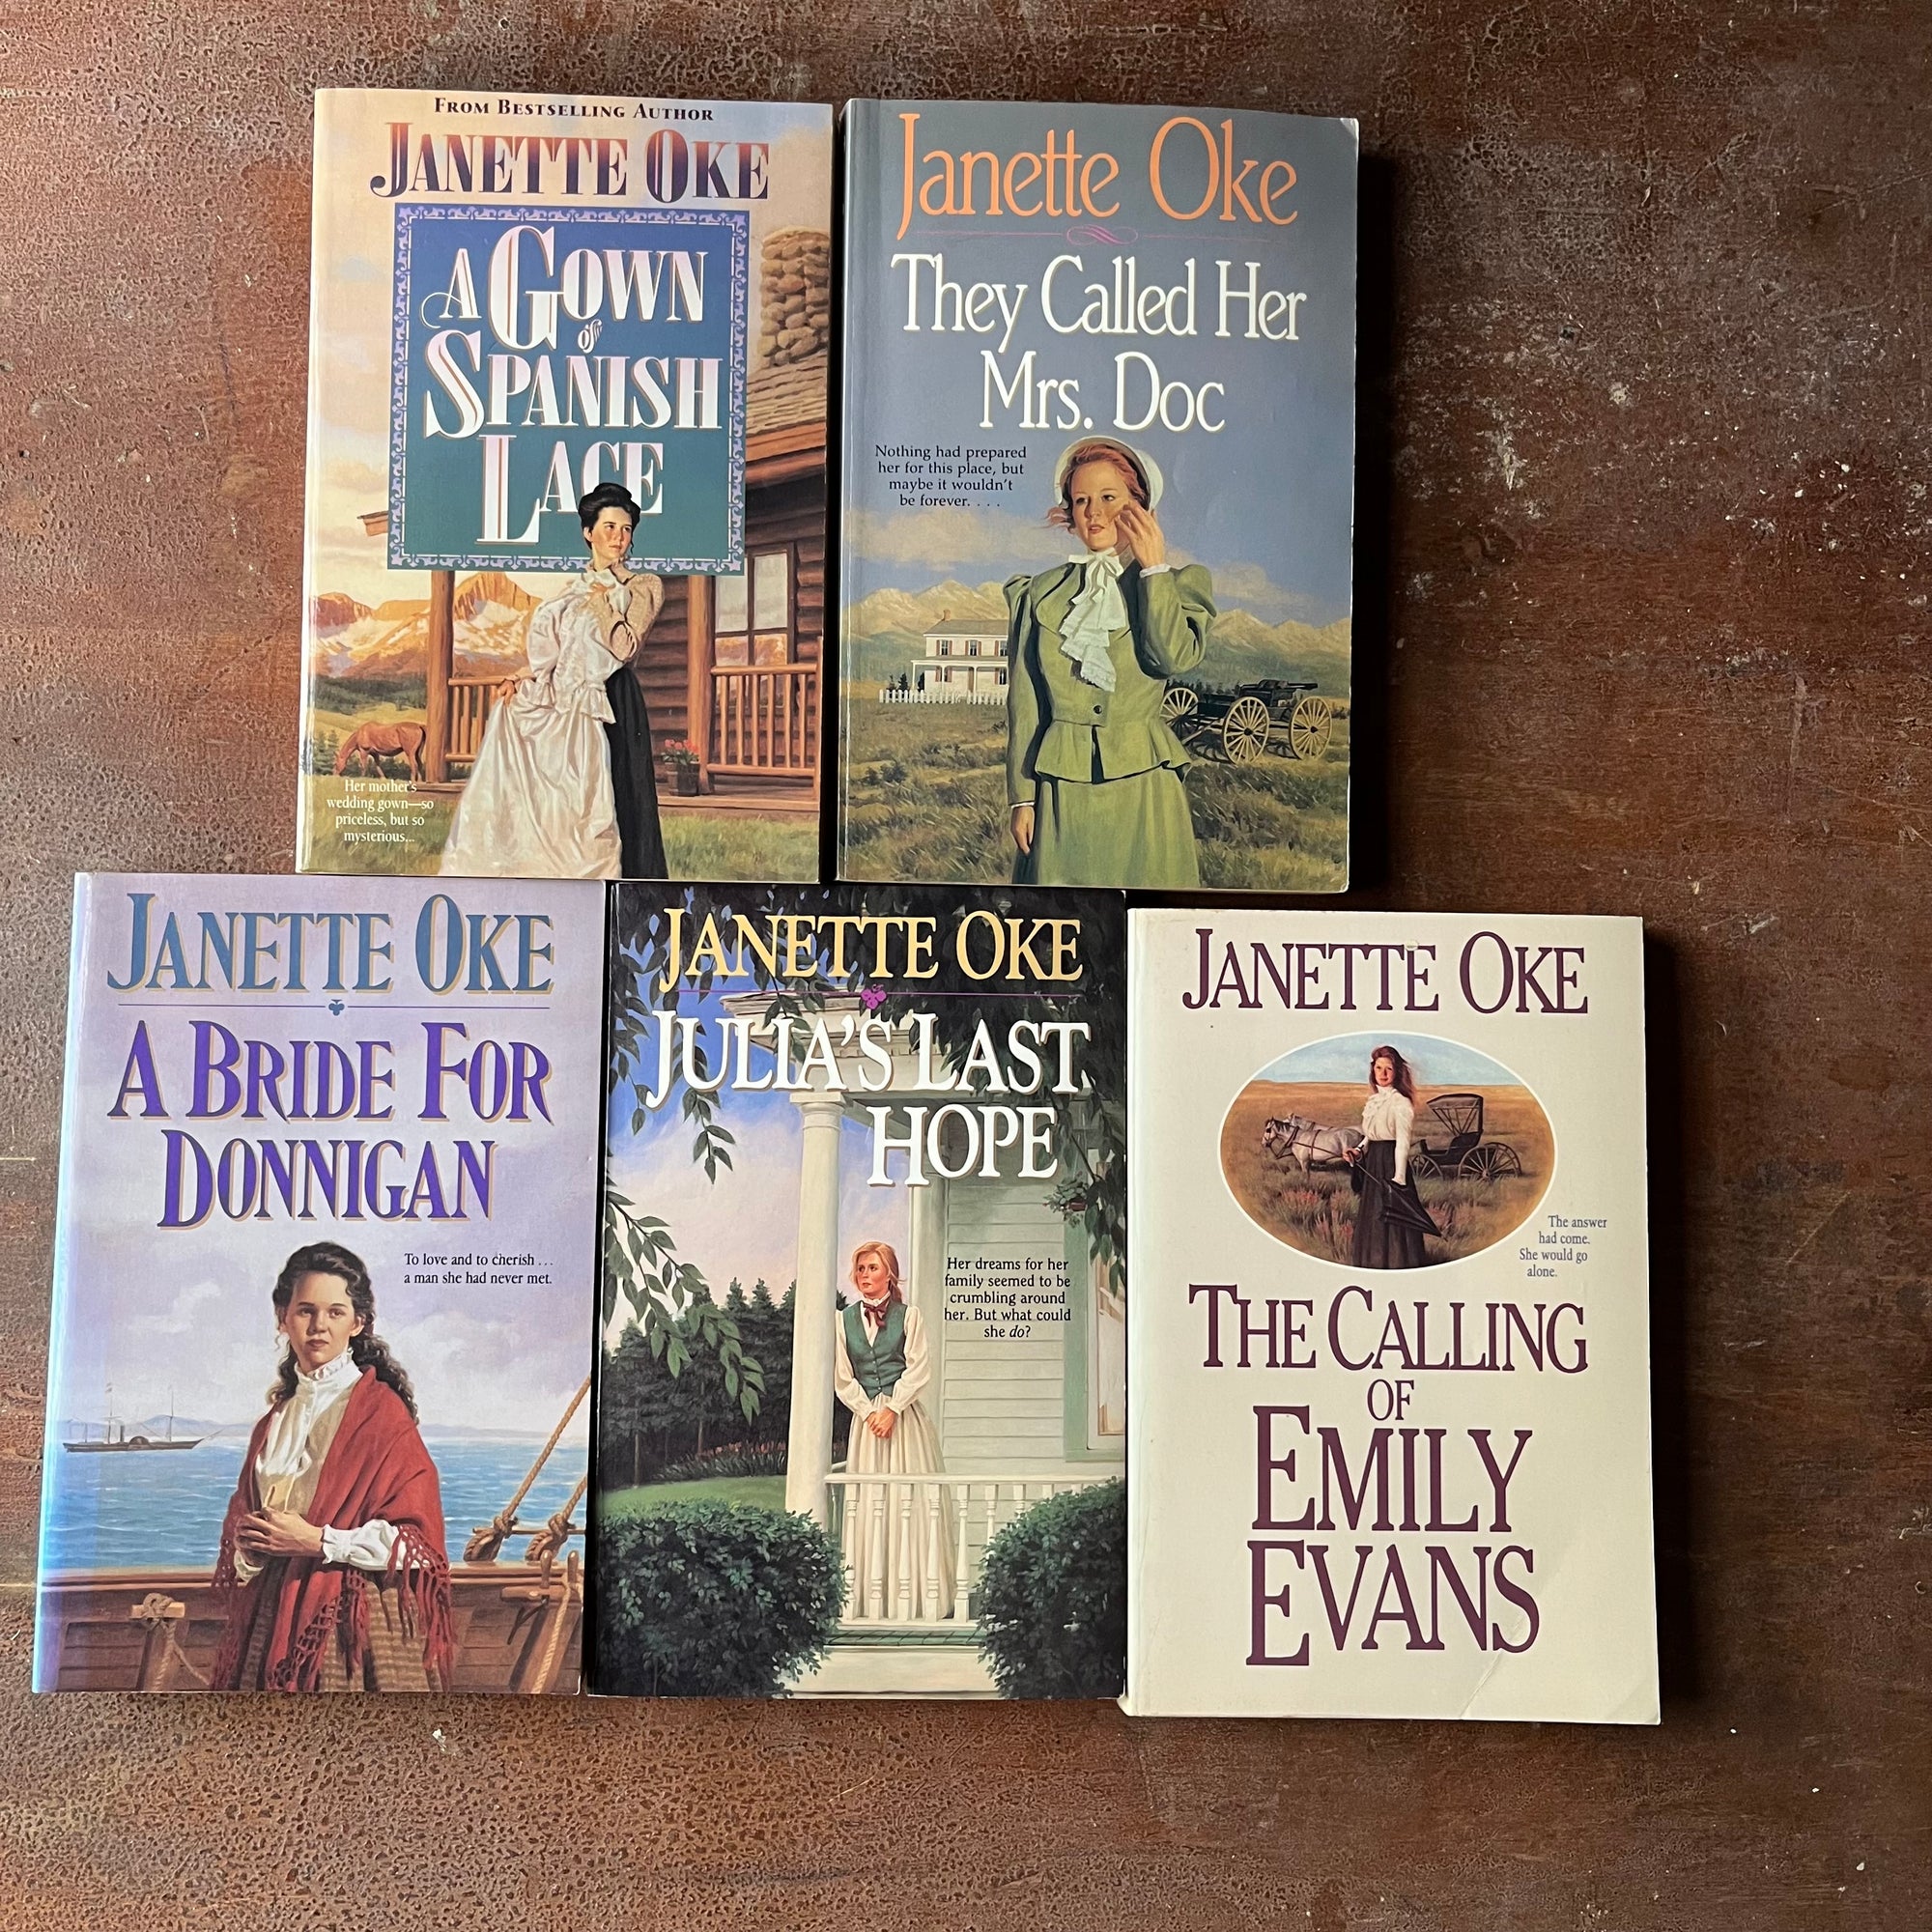 Log Cabin Vintage - Christian fiction, Christian Book Series, Christian Authors, Christian Young Adult Books, Janette Oke - A Five Book Set by Janette Oke:  A Gown of Spanish Lace, They Called Her Mrs. Doc, A Bride for Donnigan, Julia's Last Hope, and The Calling of Emily Evans - view of the front covers